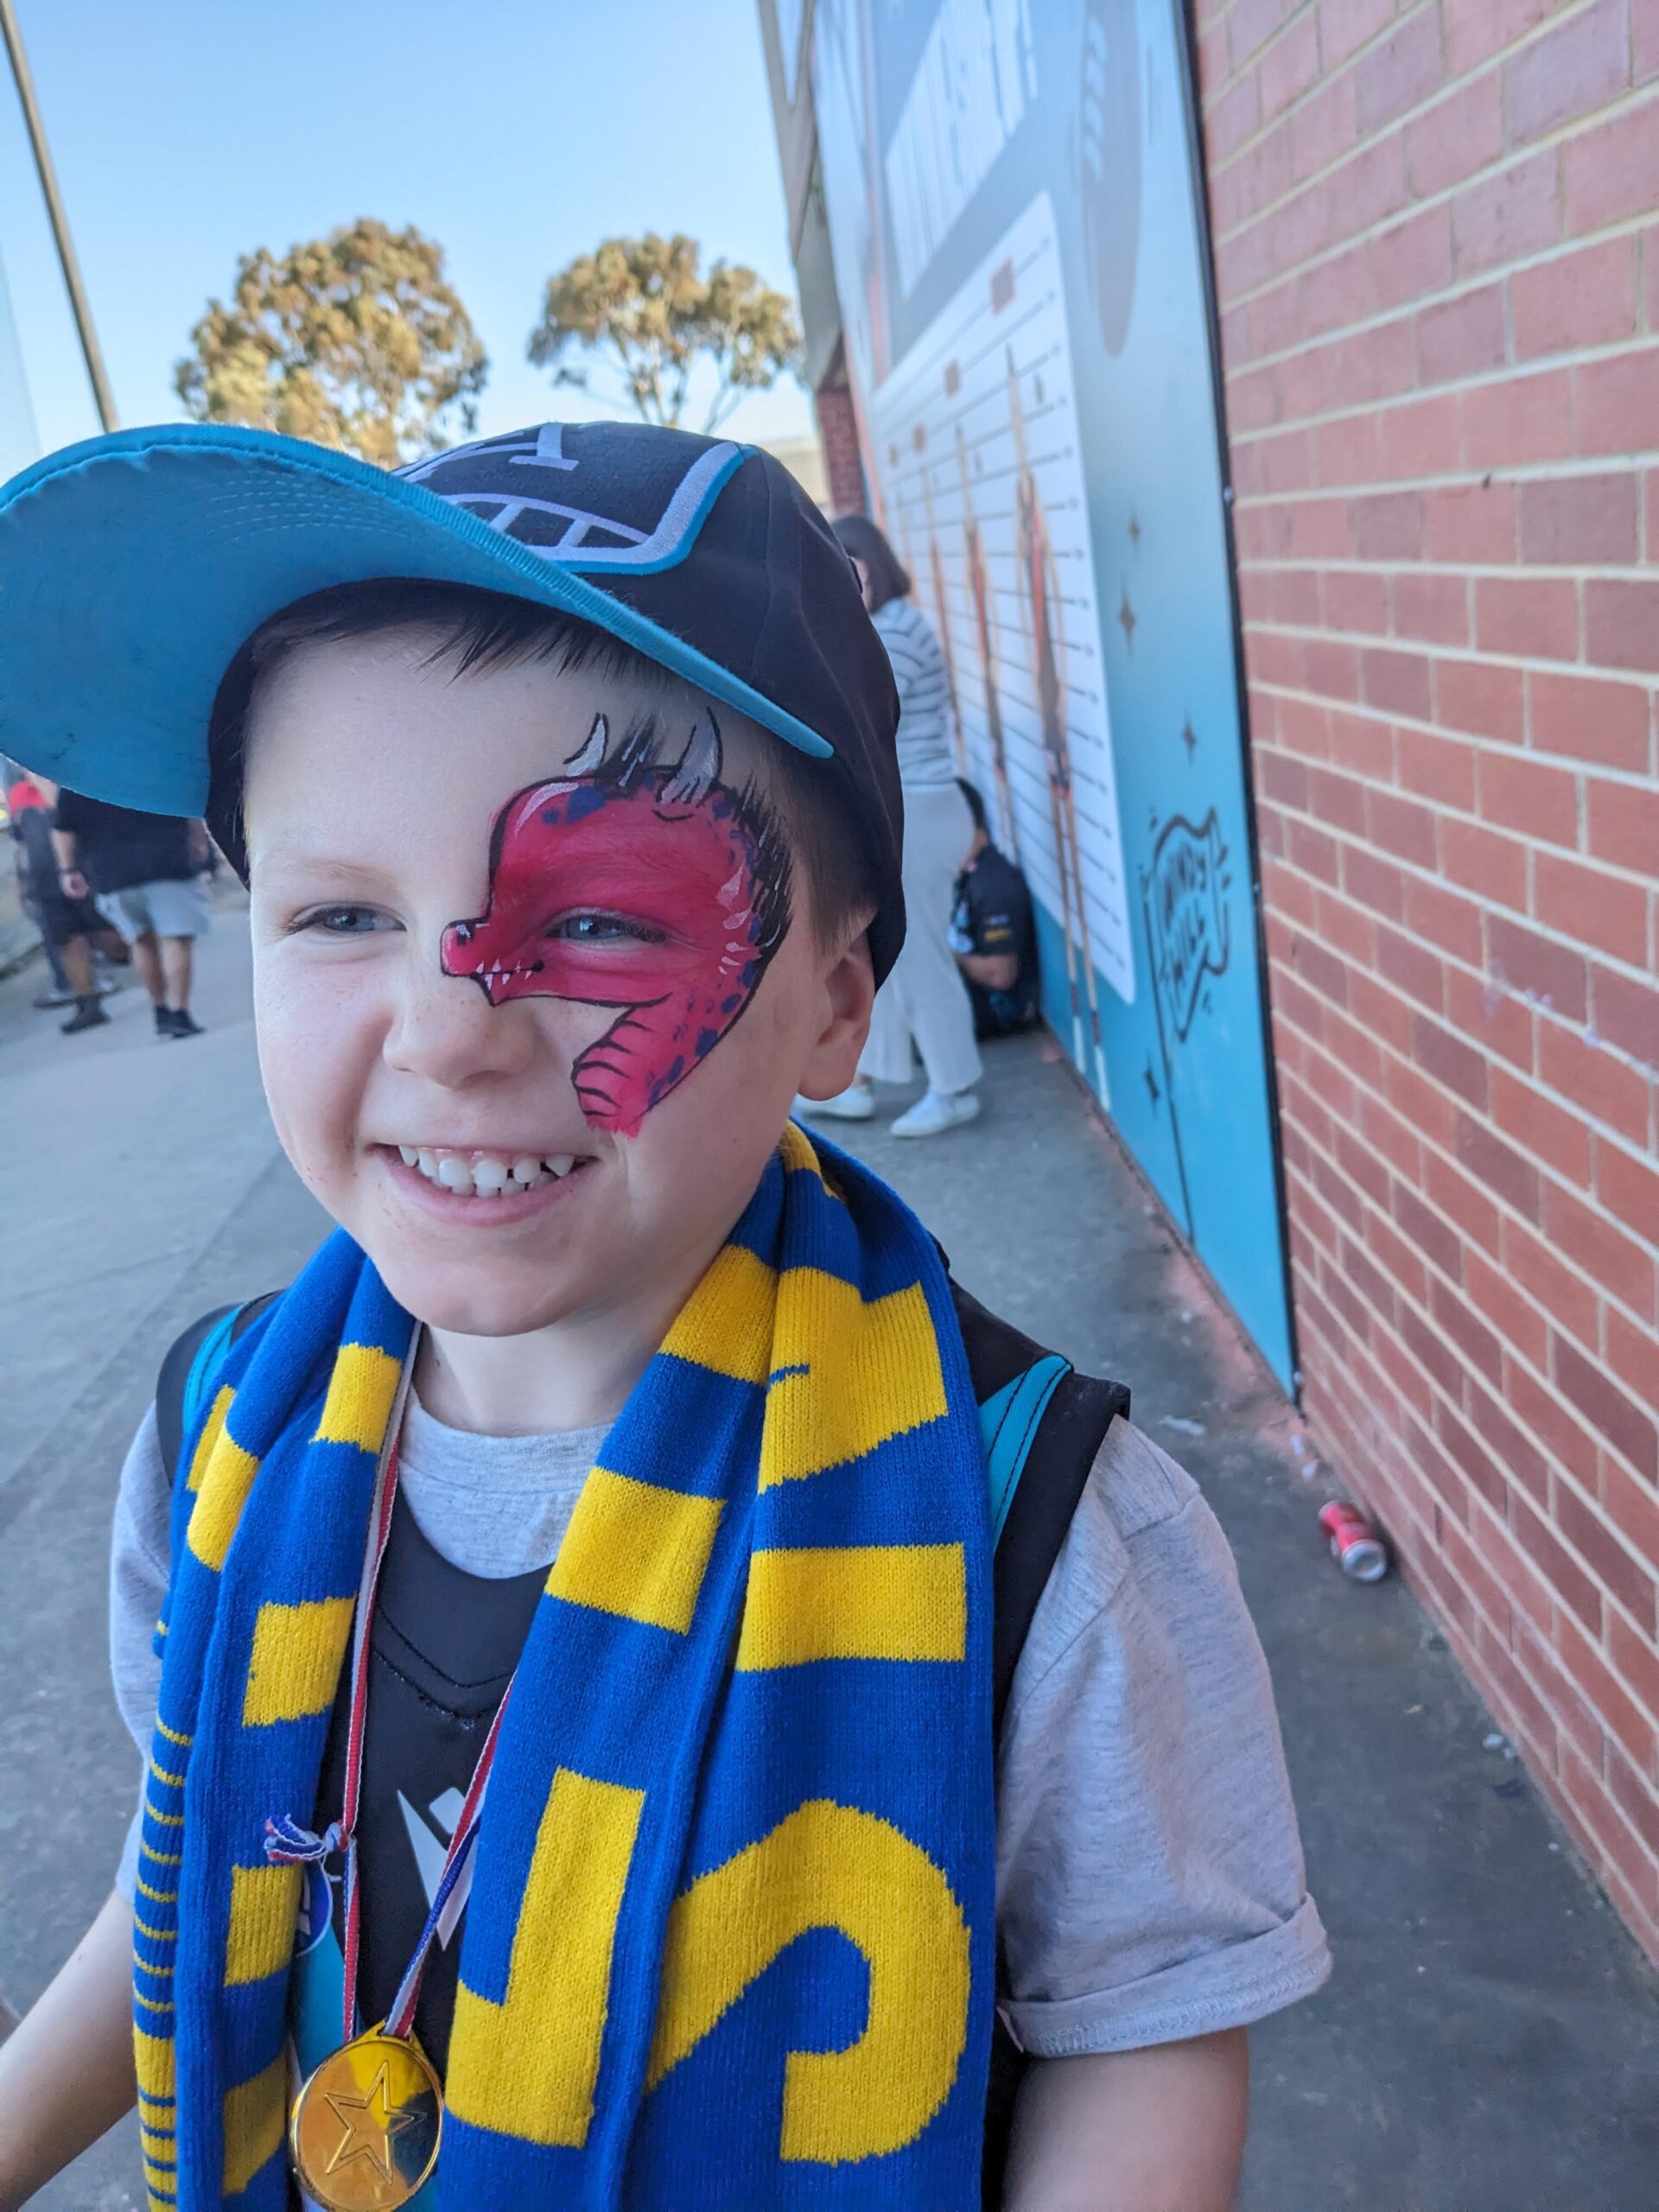 Face Painting Australia: Bring Life-Changing Thrill with Professional Face Painters